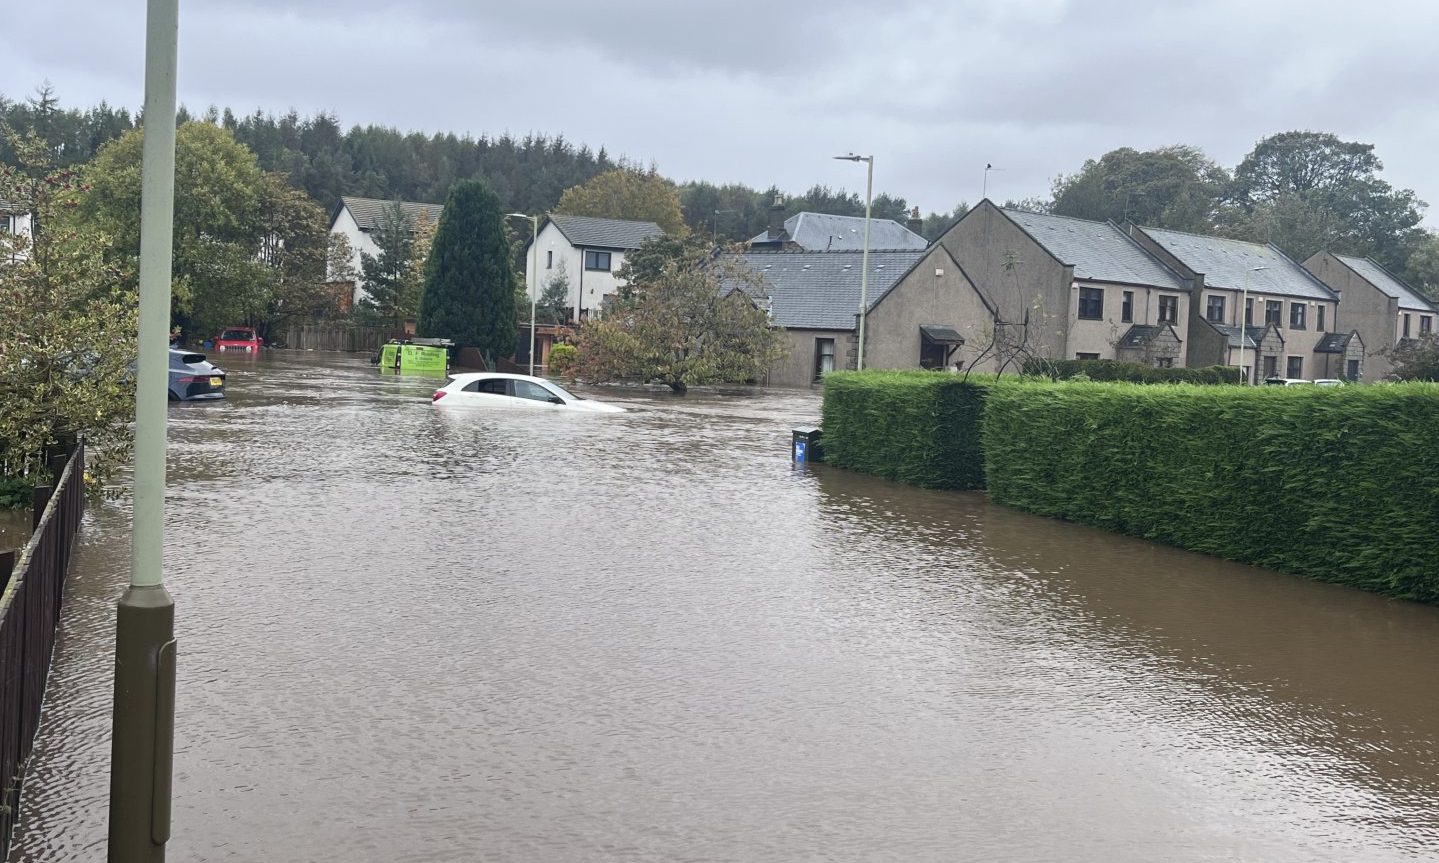 Cars in heavy flooding in Heron Rise, Dundee.